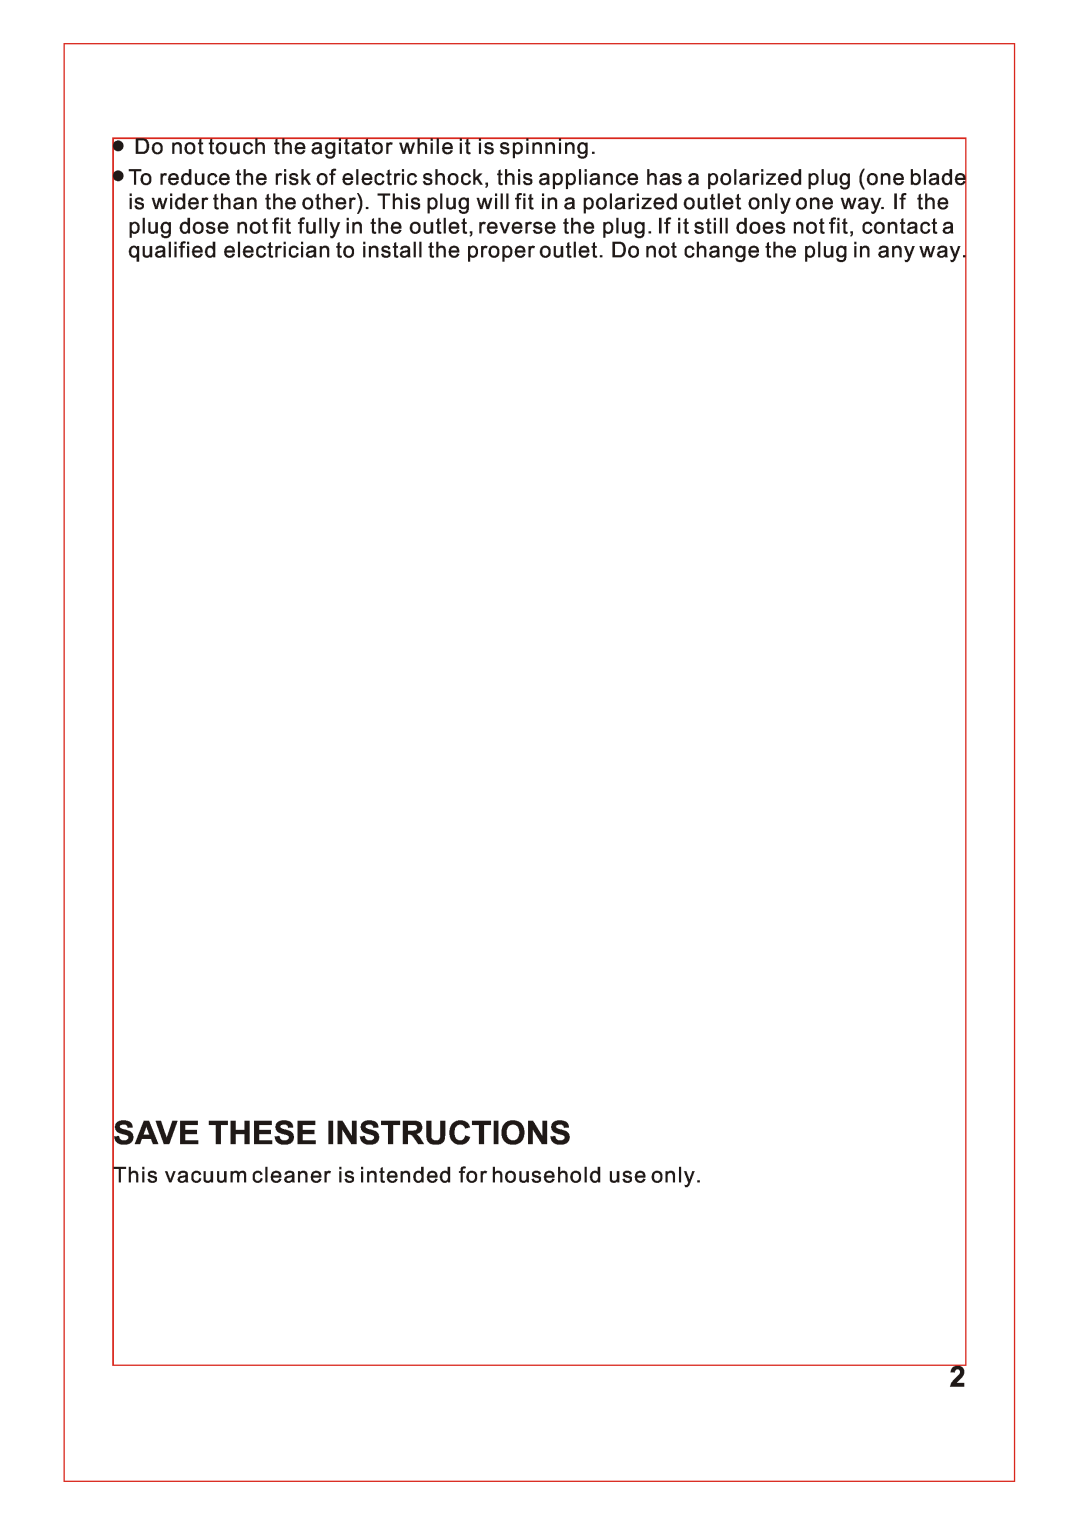 Sanyo SC-150, SC-180 instruction manual Save These Instructions 